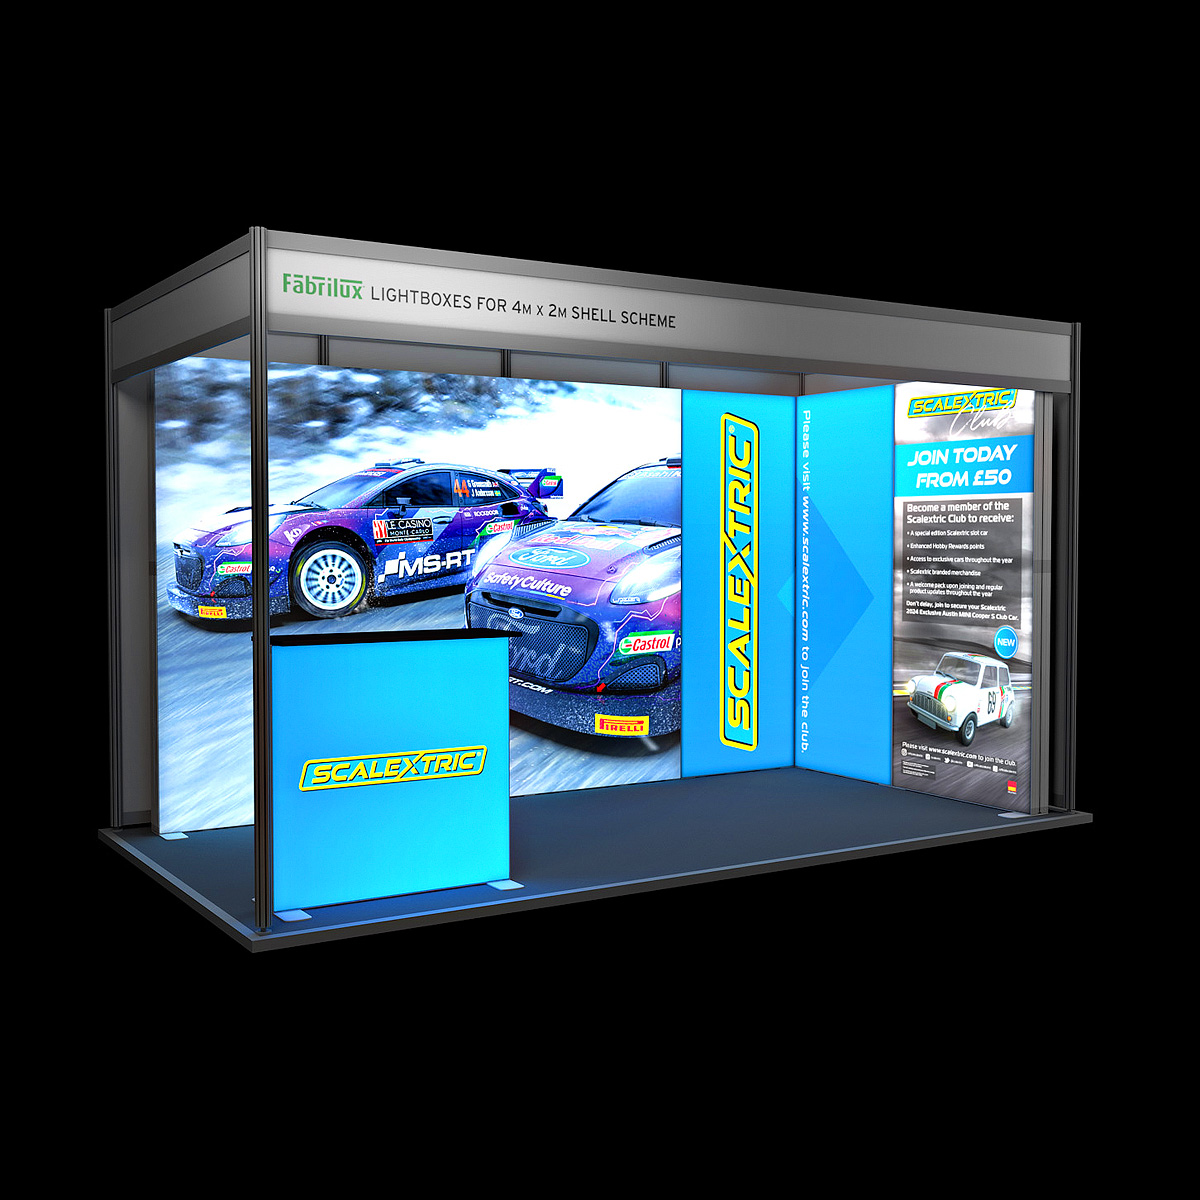 4m x 2m FABRILUX® LED Lightboxes Modular Exhibition Stand Shell Scheme